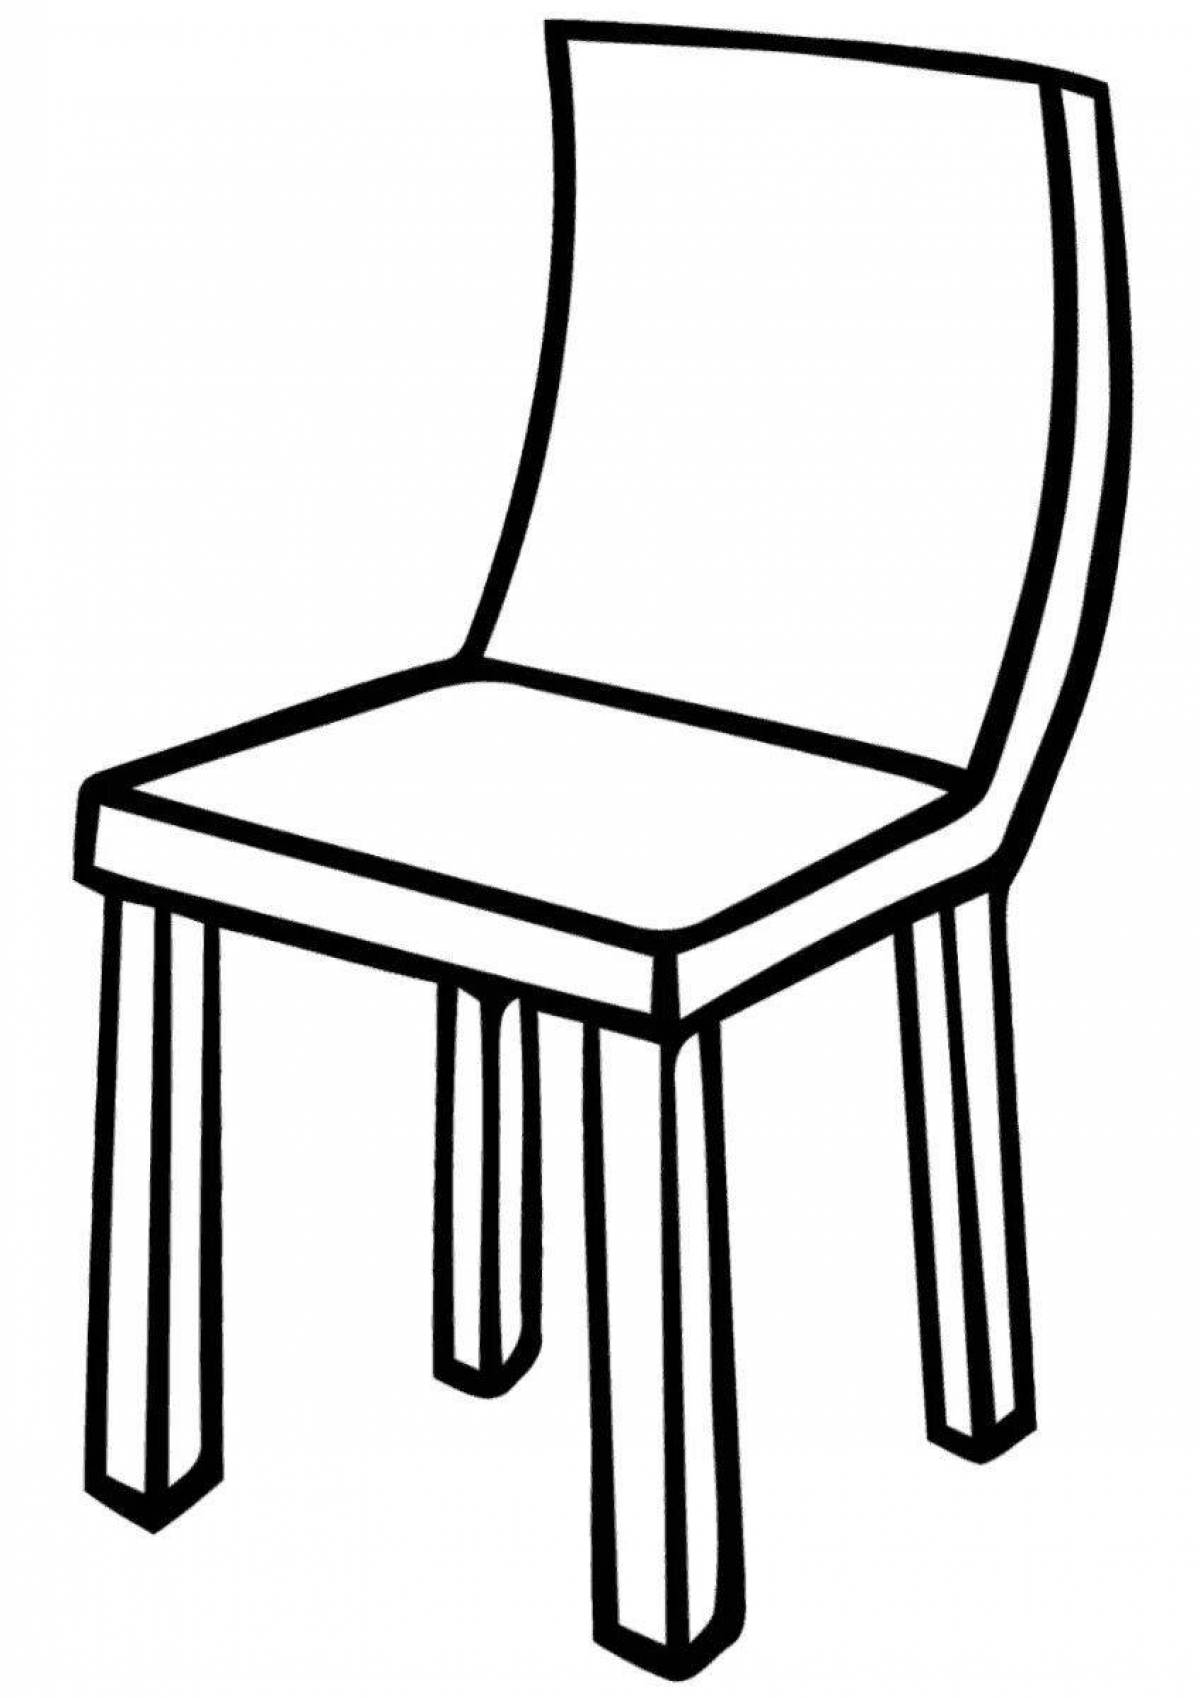 Playful stool coloring page